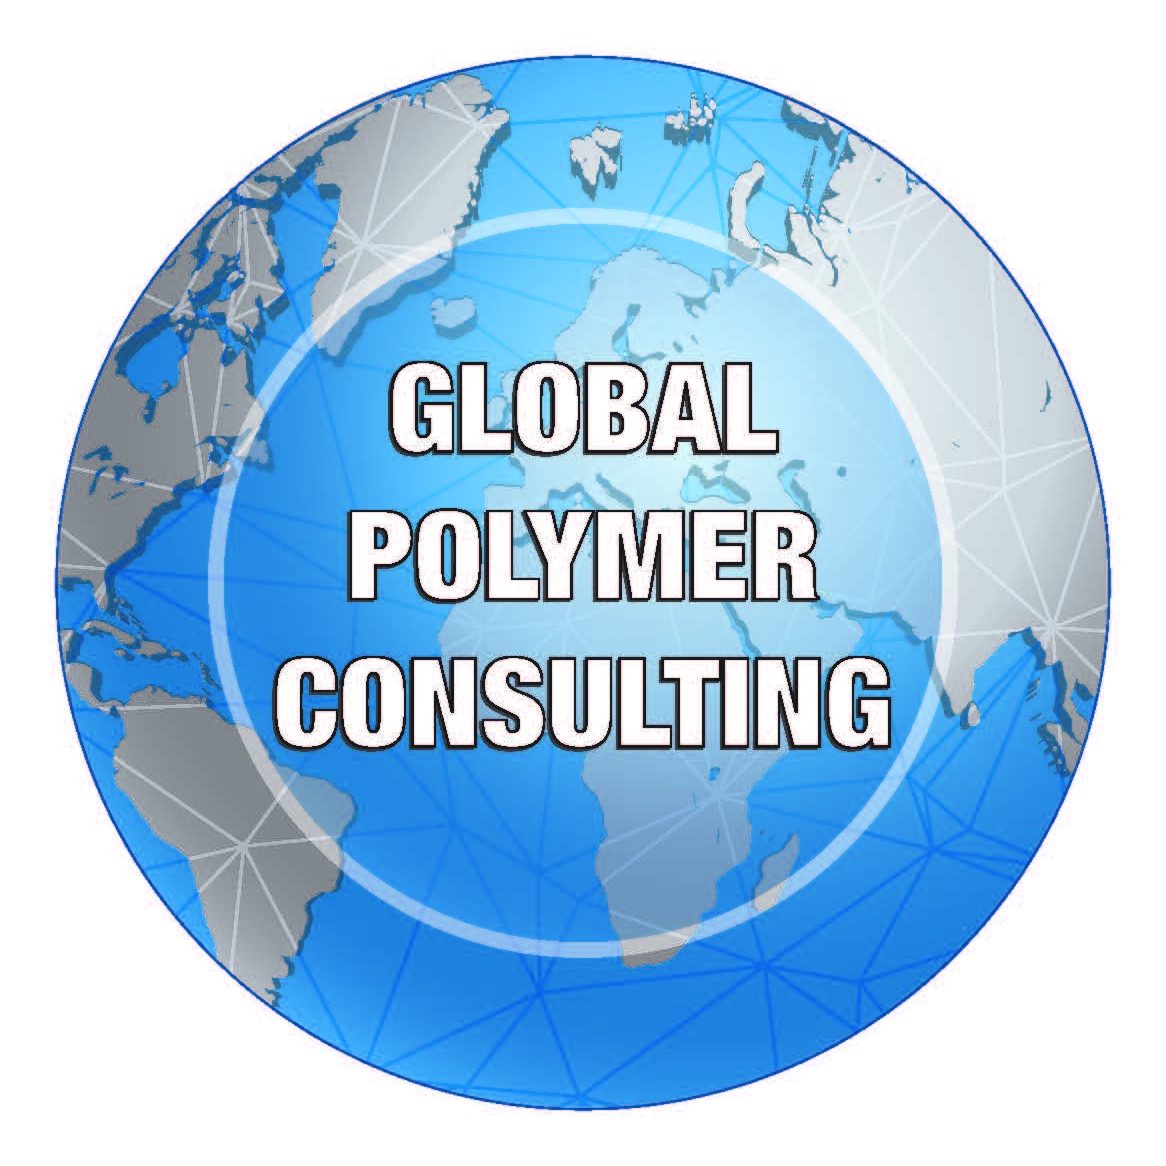 Global Polymer Consulting (GPC) Ltd